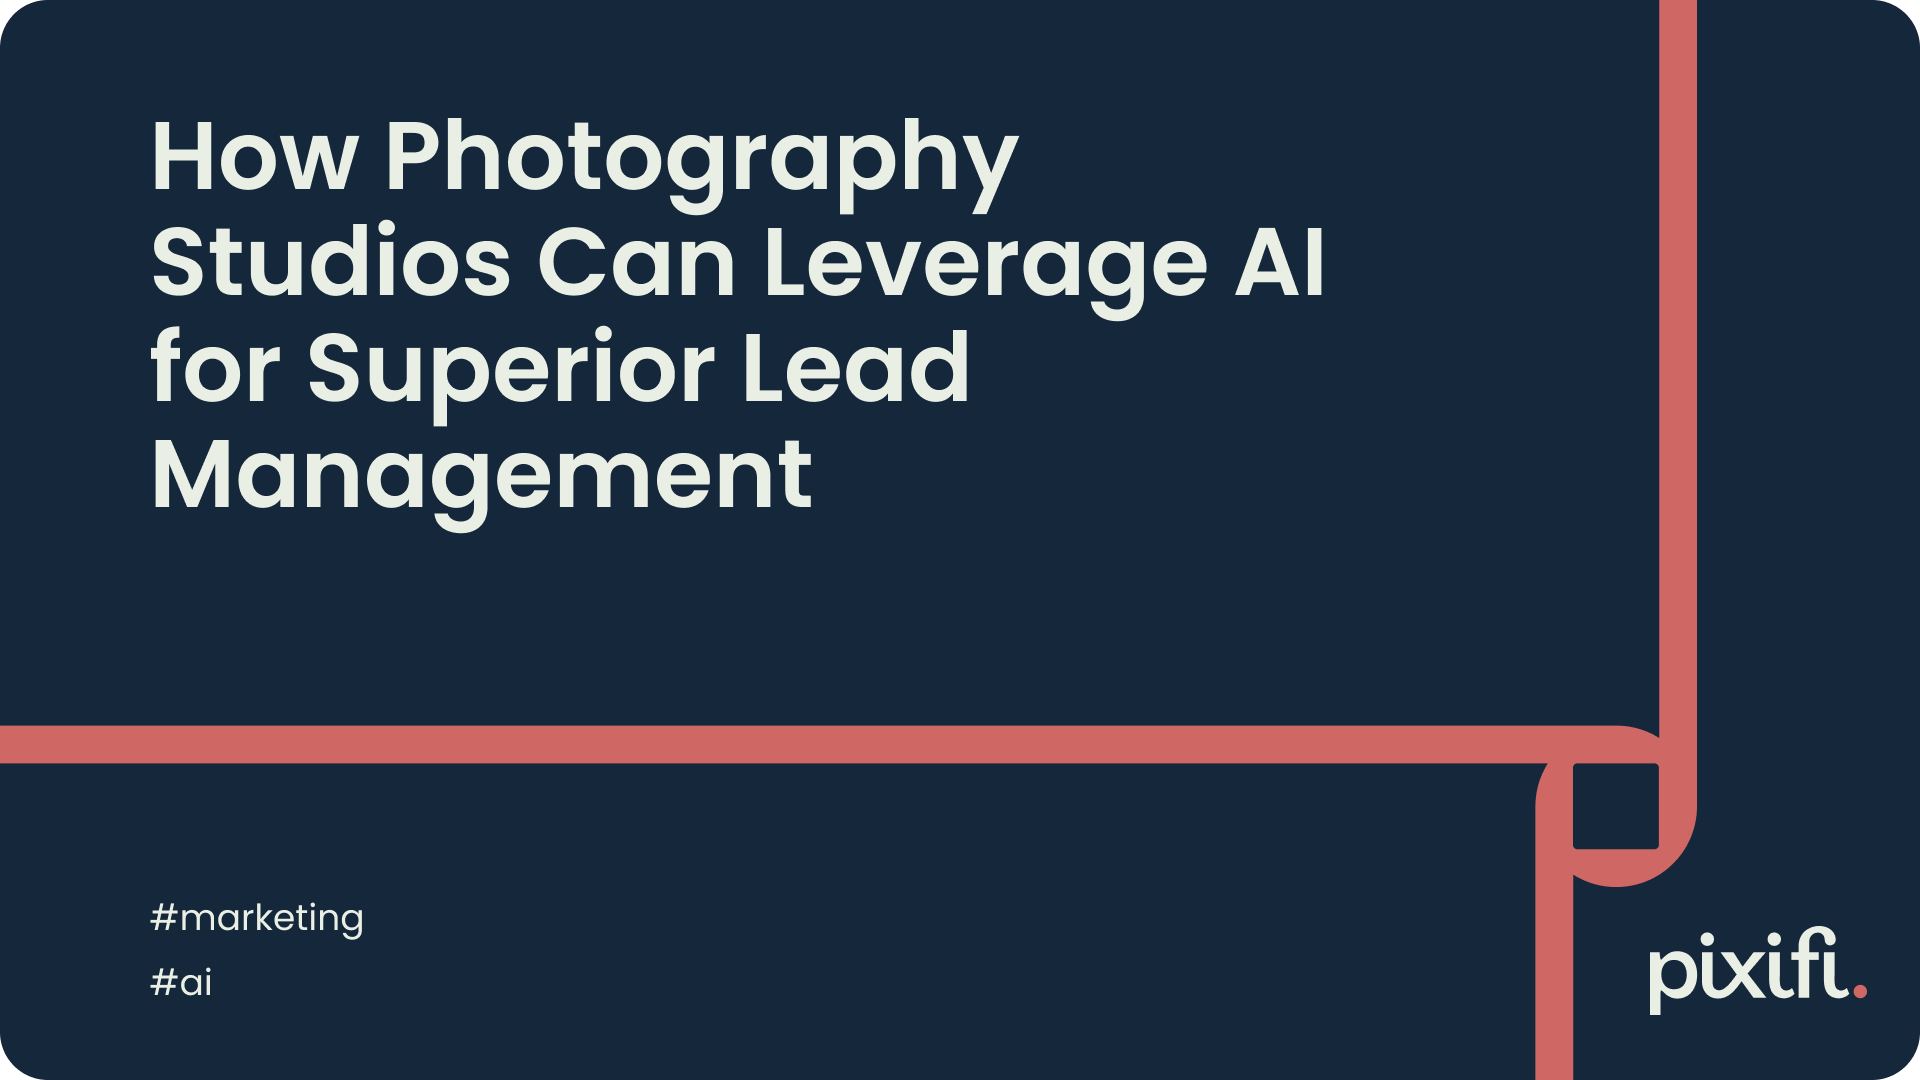 How Photography Studios Can Leverage AI for Superior Lead Management